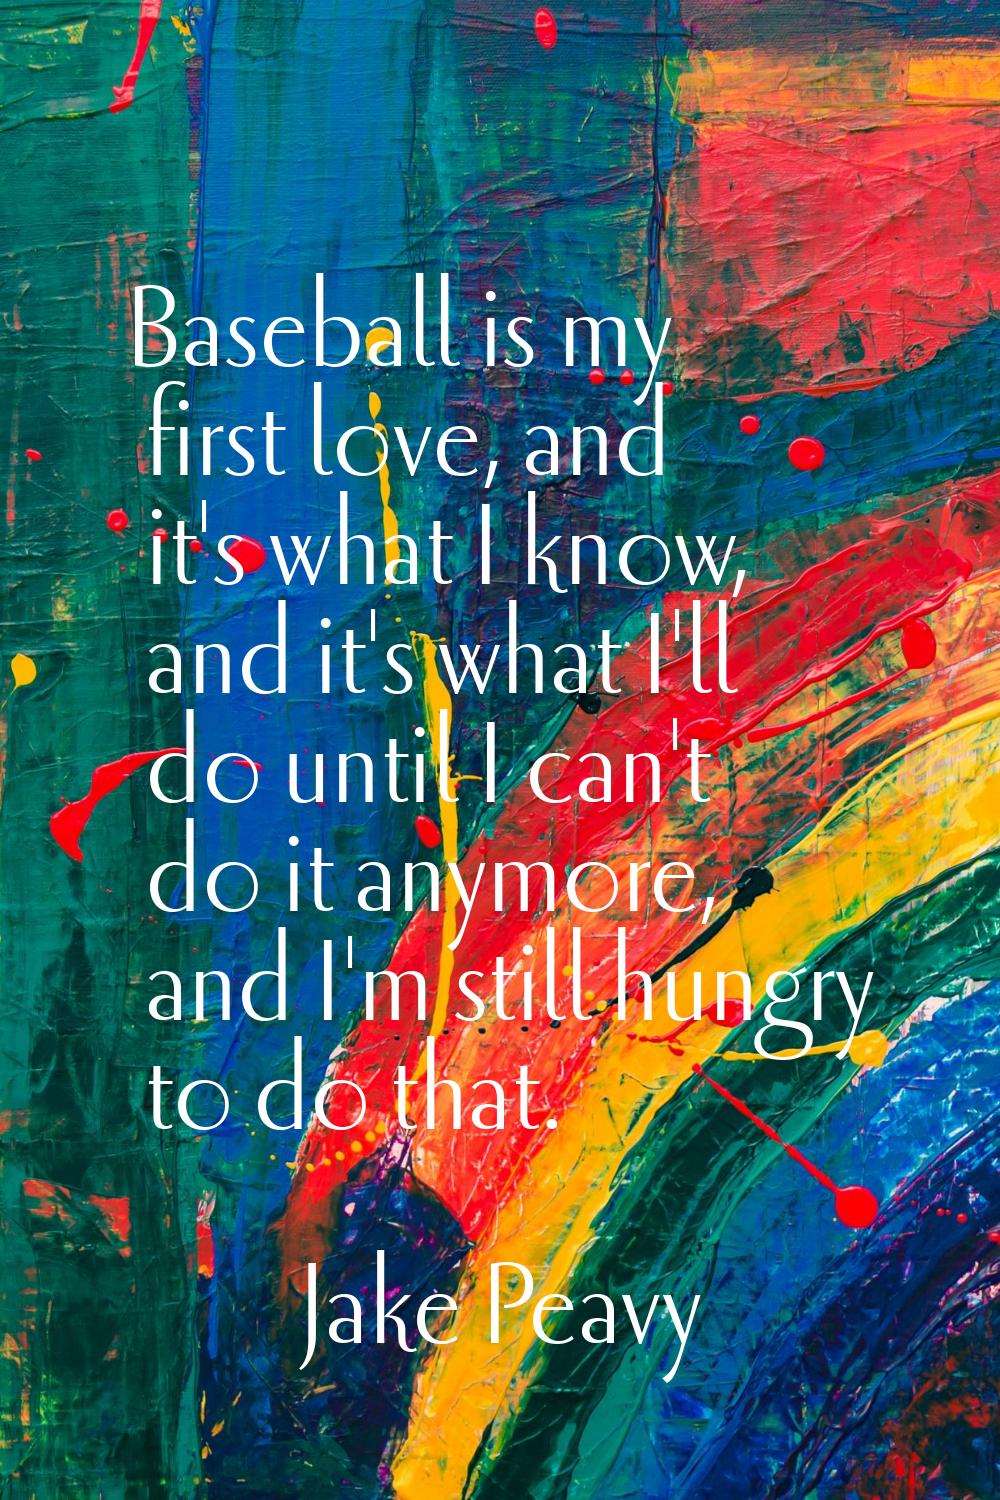 Baseball is my first love, and it's what I know, and it's what I'll do until I can't do it anymore,